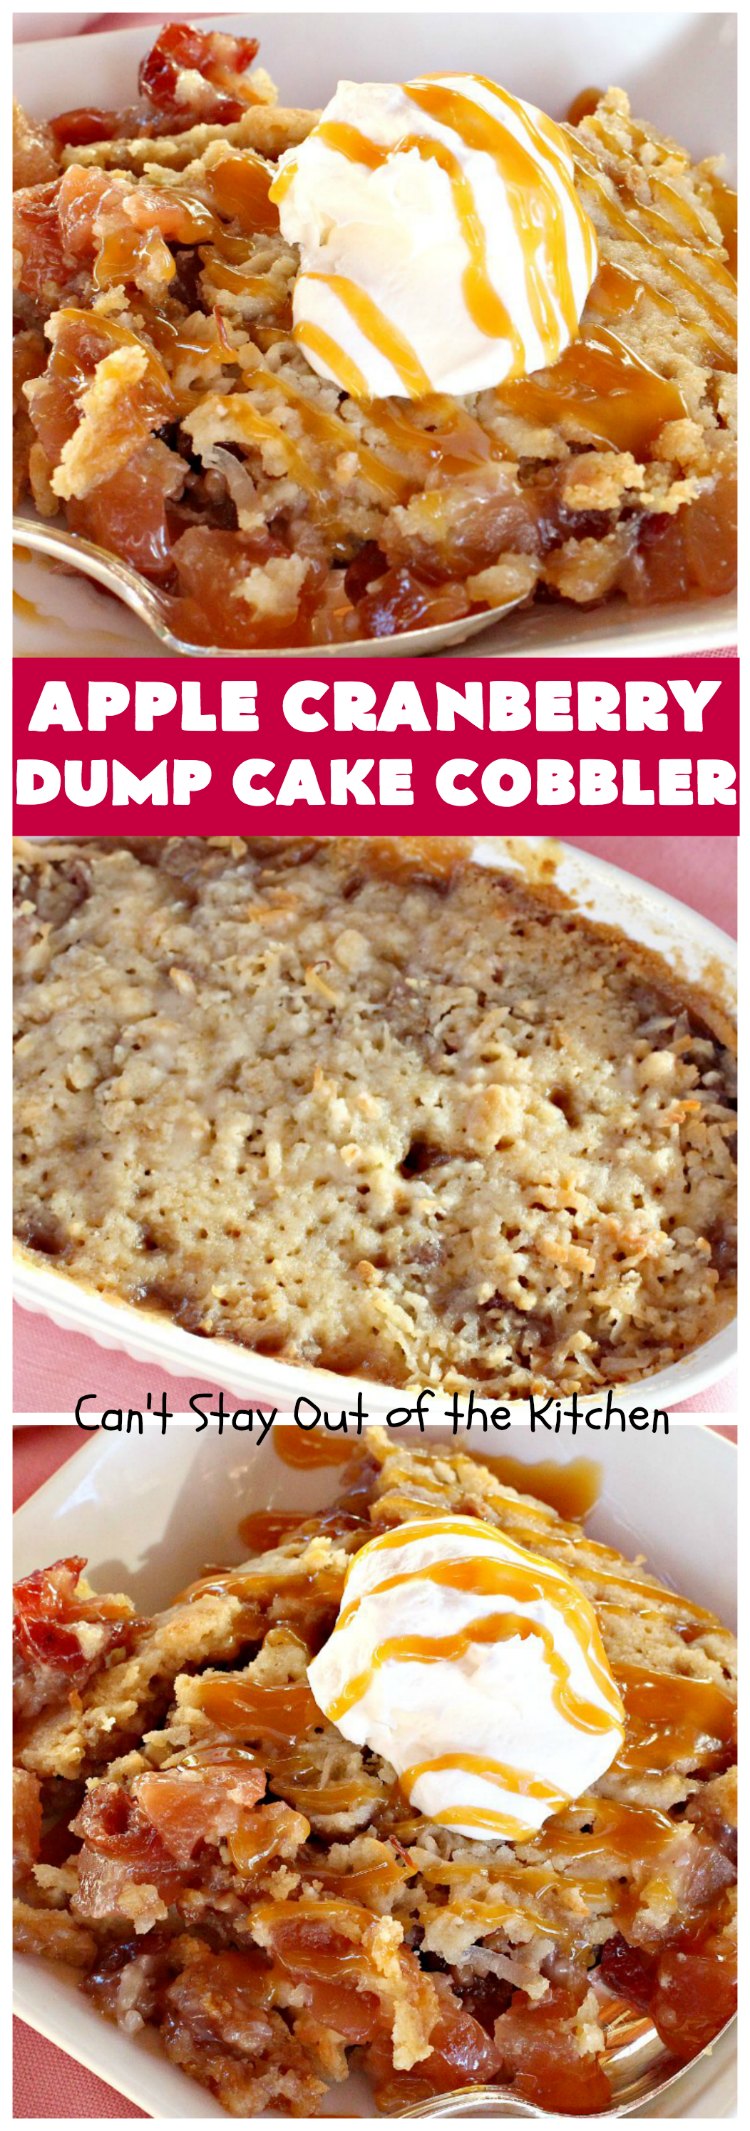 Apple Cranberry Dump Cake Cobbler | Can't Stay Out of the Kitchen | this festive & beautiful #DumpCake #recipe uses only 5 ingredients! It's perfect for a company or #holiday #dessert, especially between #Thanksgiving and #Christmas! #cobbler #AppleCranberryDumpCakeCobbler #coconut #AppleCobbler #AppleCranberryCobbler #pecans 